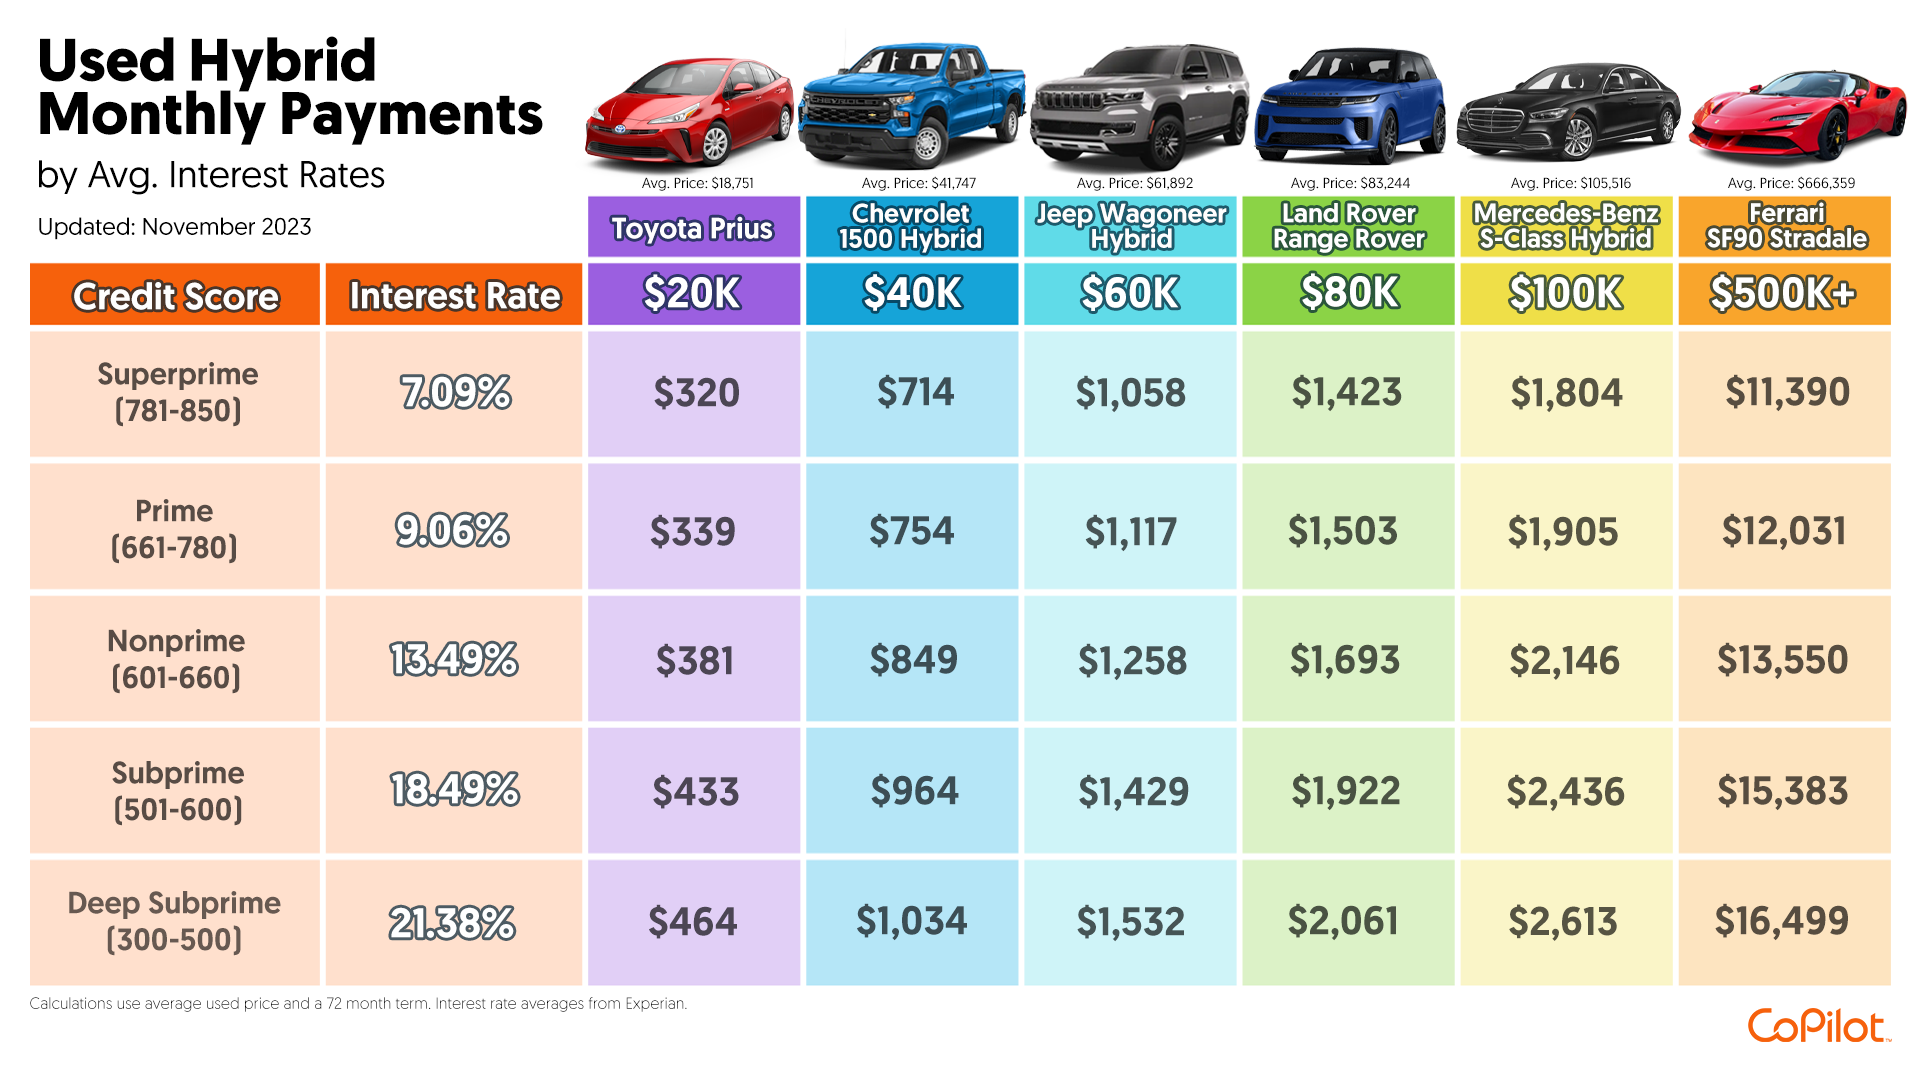 Monthly payment amounts for used hybrid cars at various price levels and interest rates